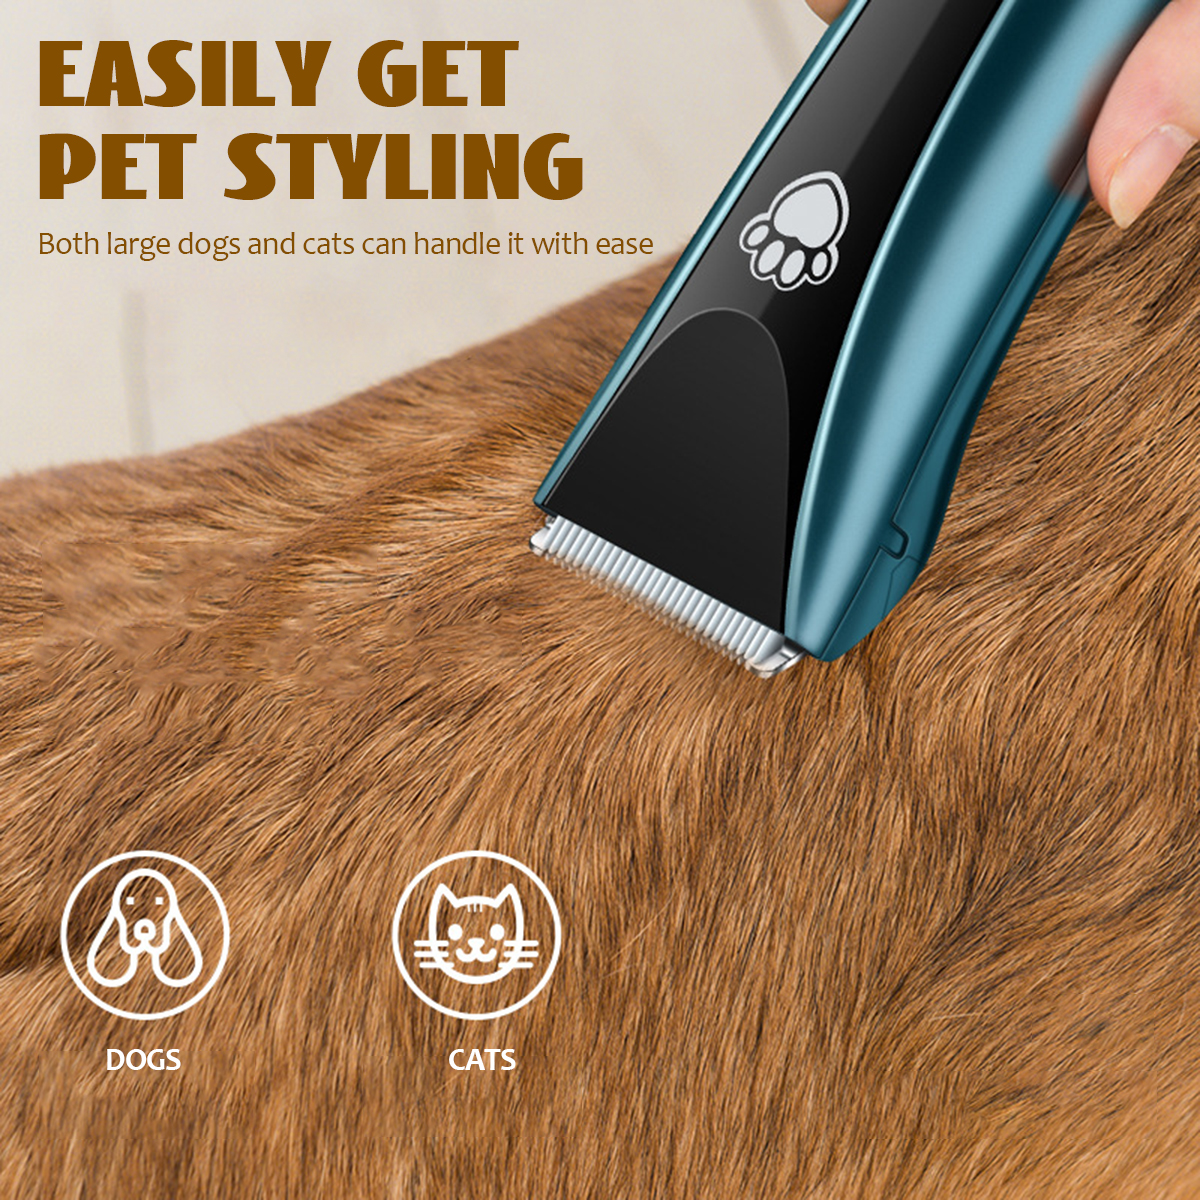 5W-Professional-Pet-Dog-Cat-Animal-Clippers-Hair-Grooming-Cordless-Trimmer-Shaver-USB-Charging-1958814-7